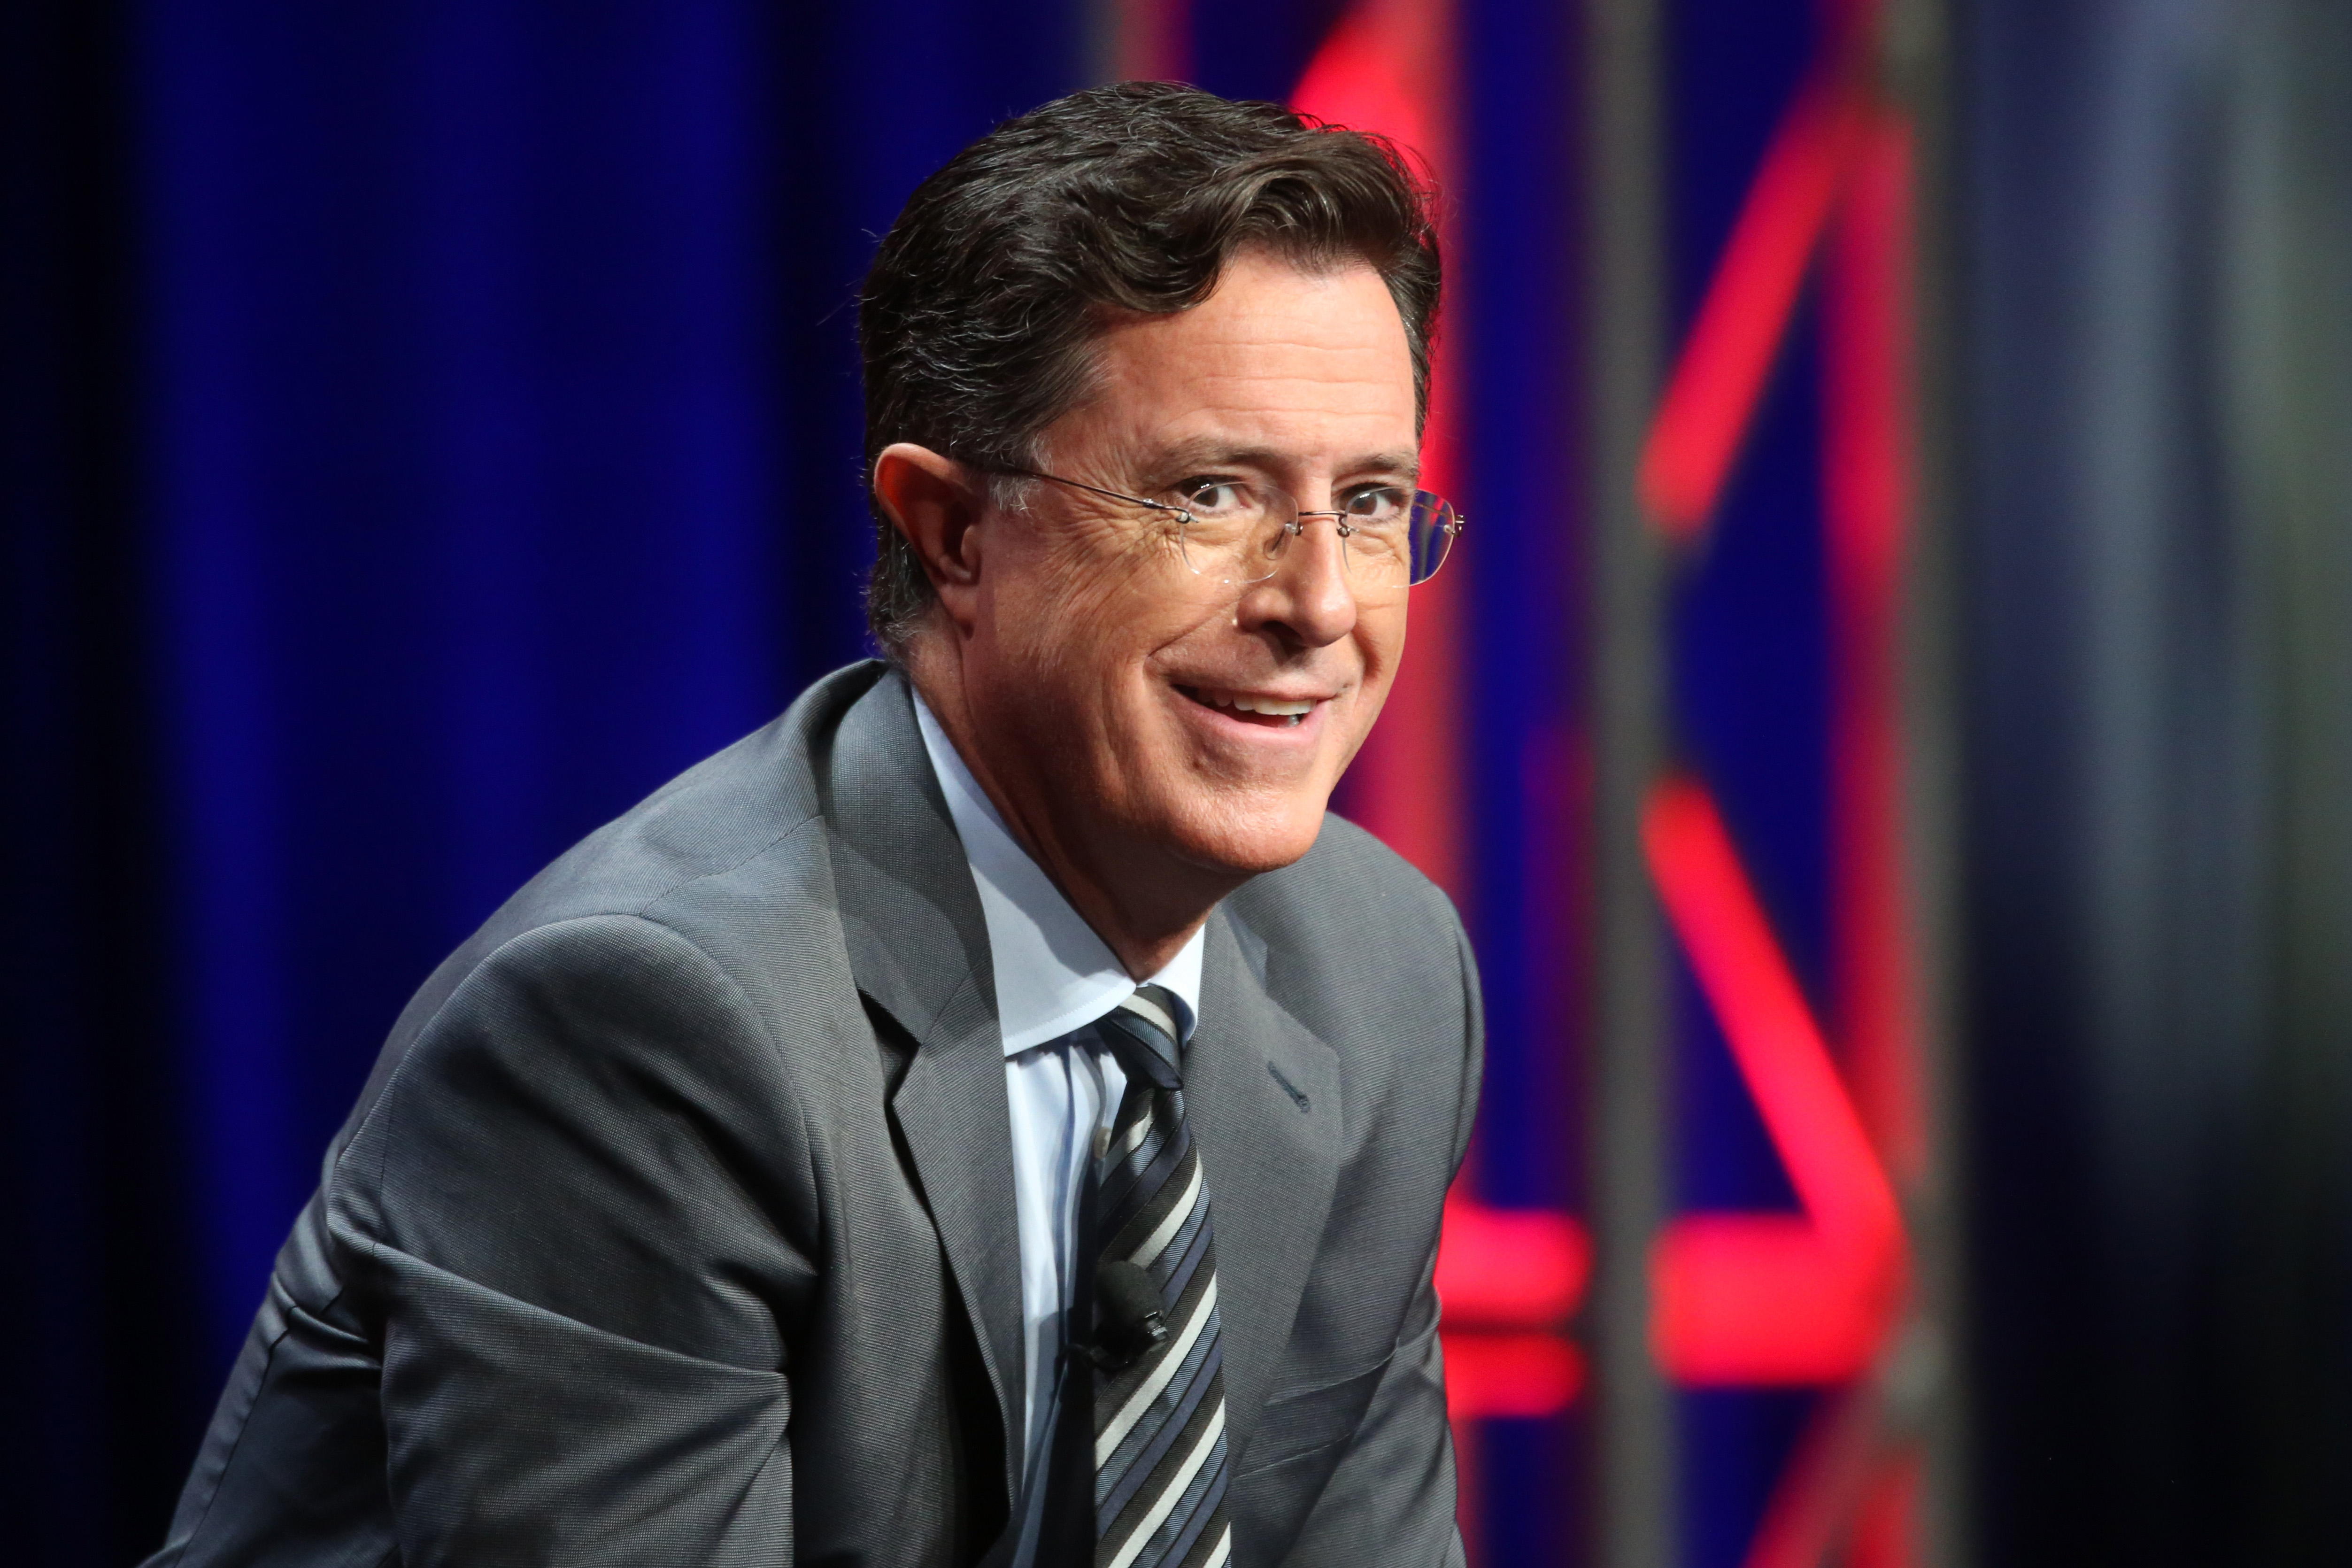 Relive Stephen Colbert's Election Night Monologue.